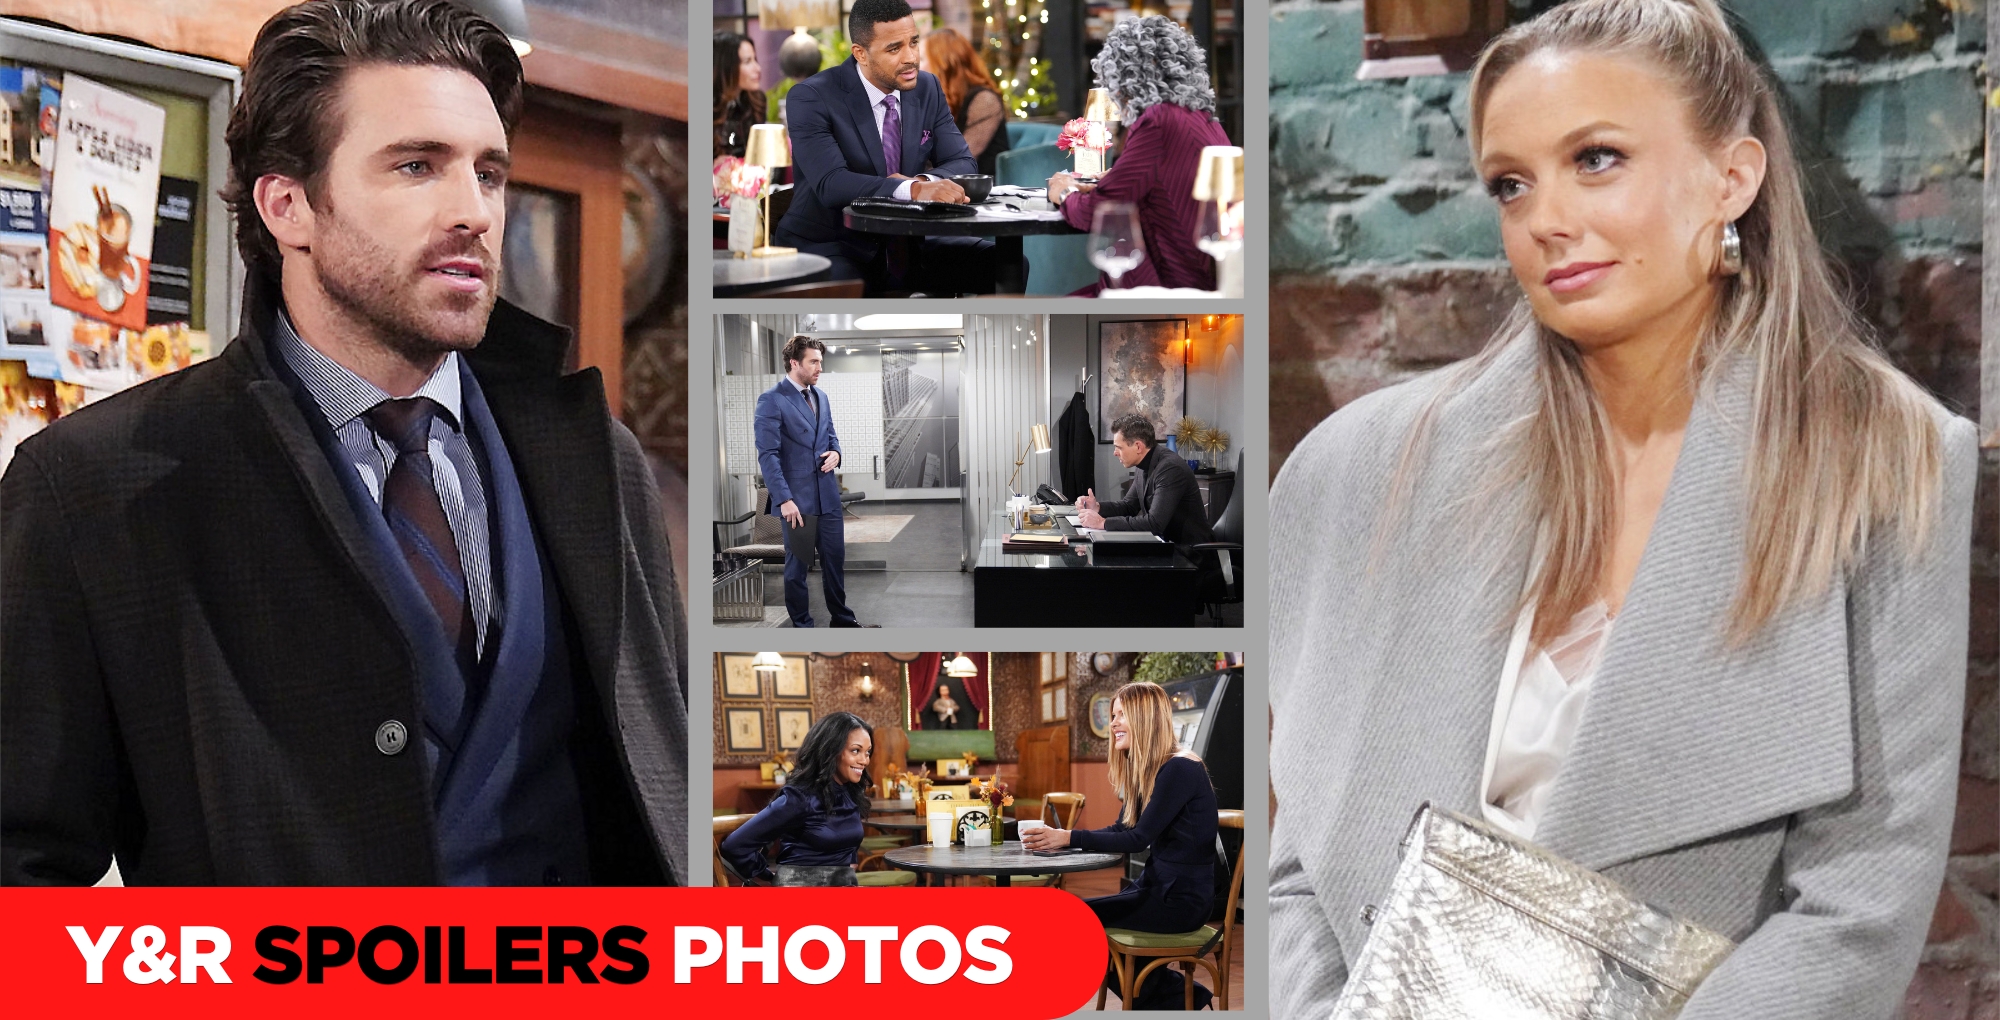 young and the restless preview photos for tuesday, february 26, episode 12816 collage.